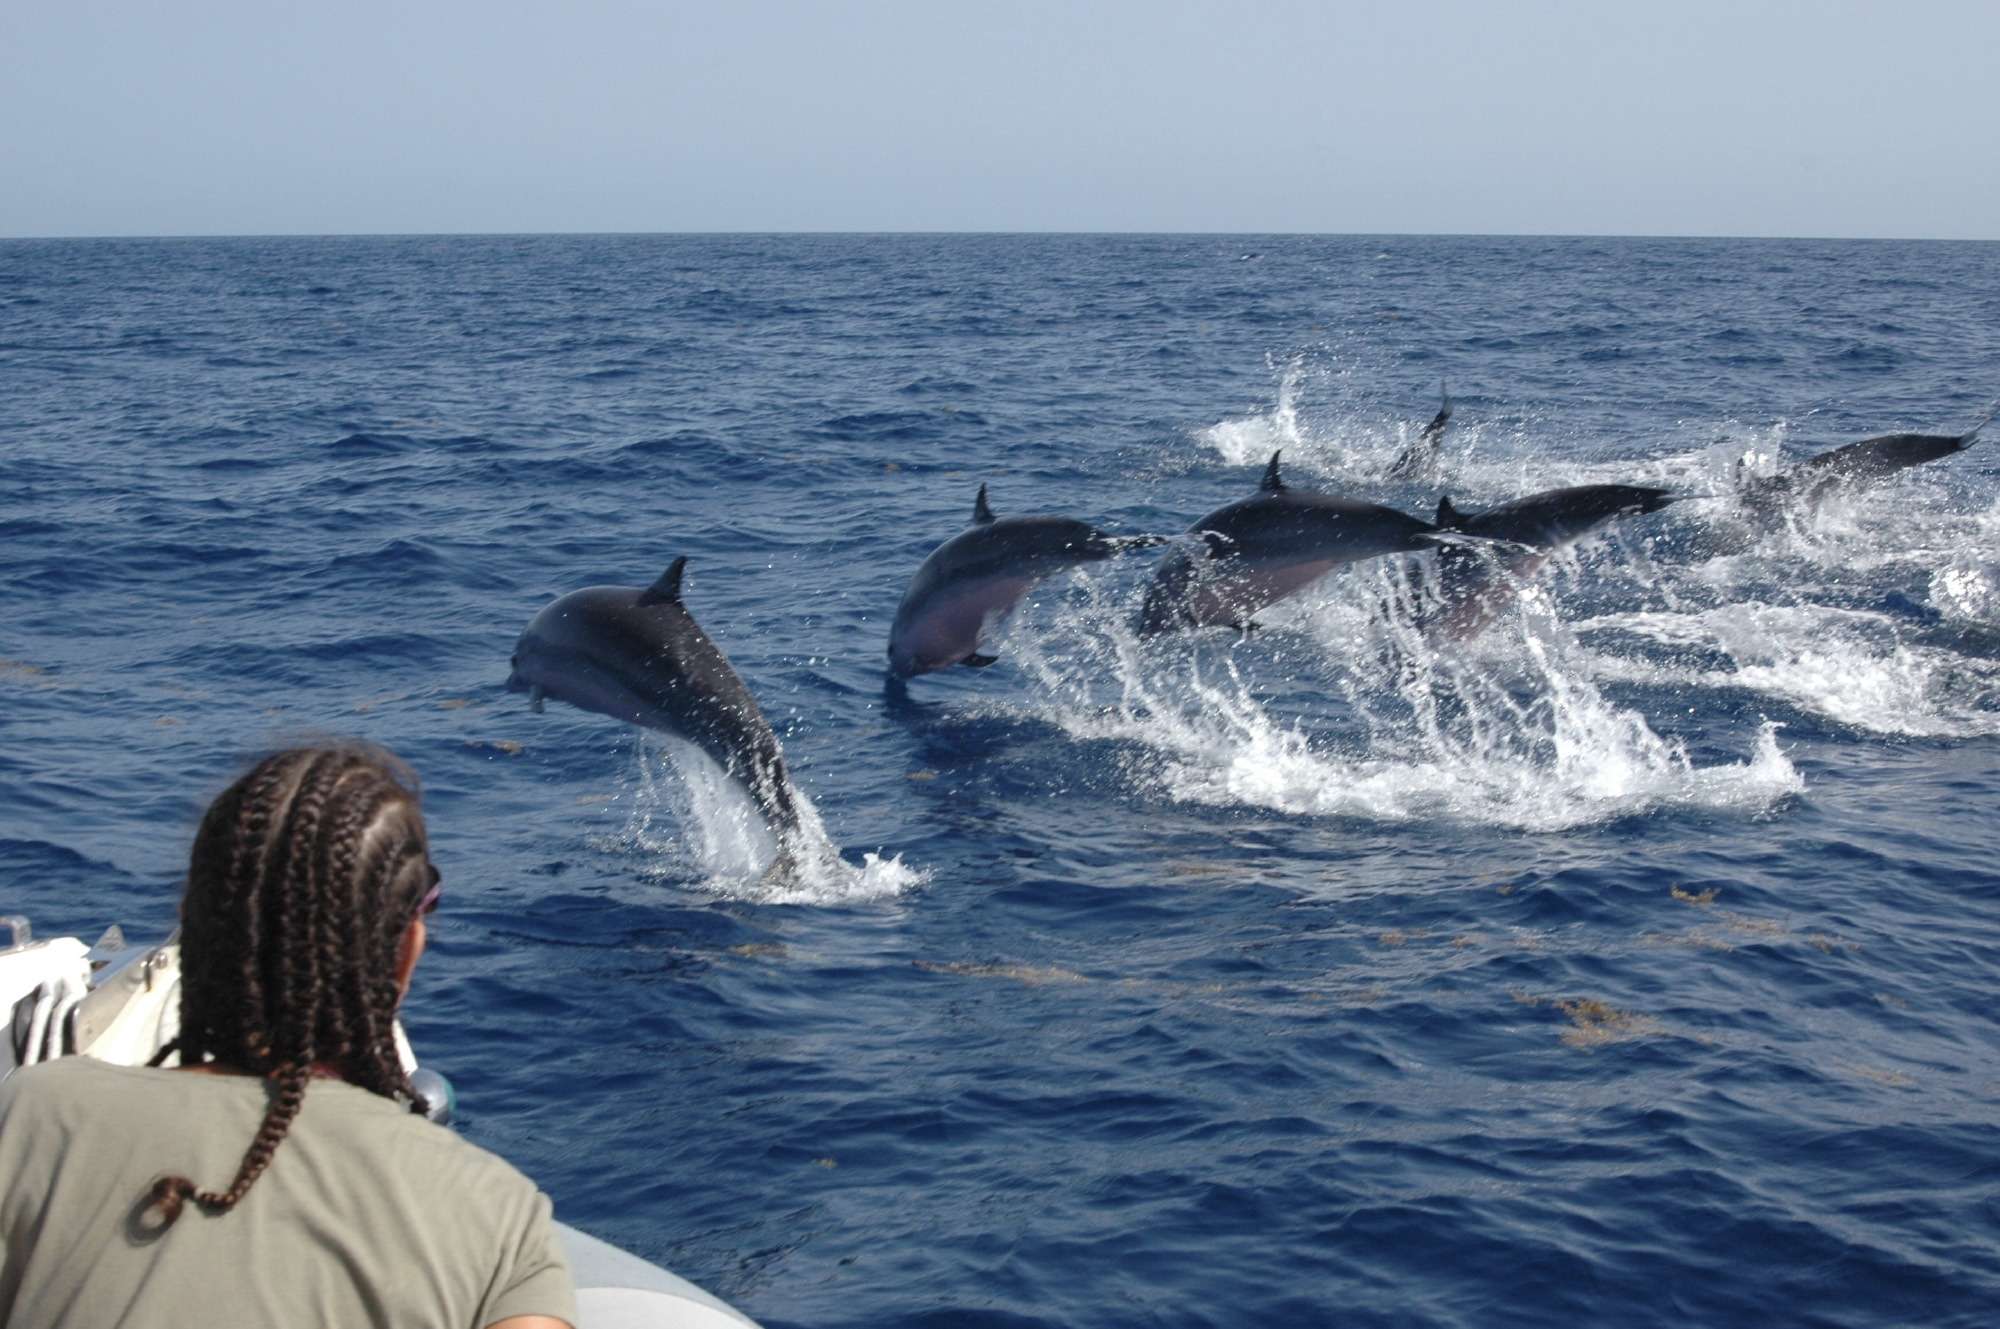 Dolphins jump out of the water with Shelltone Whale Project